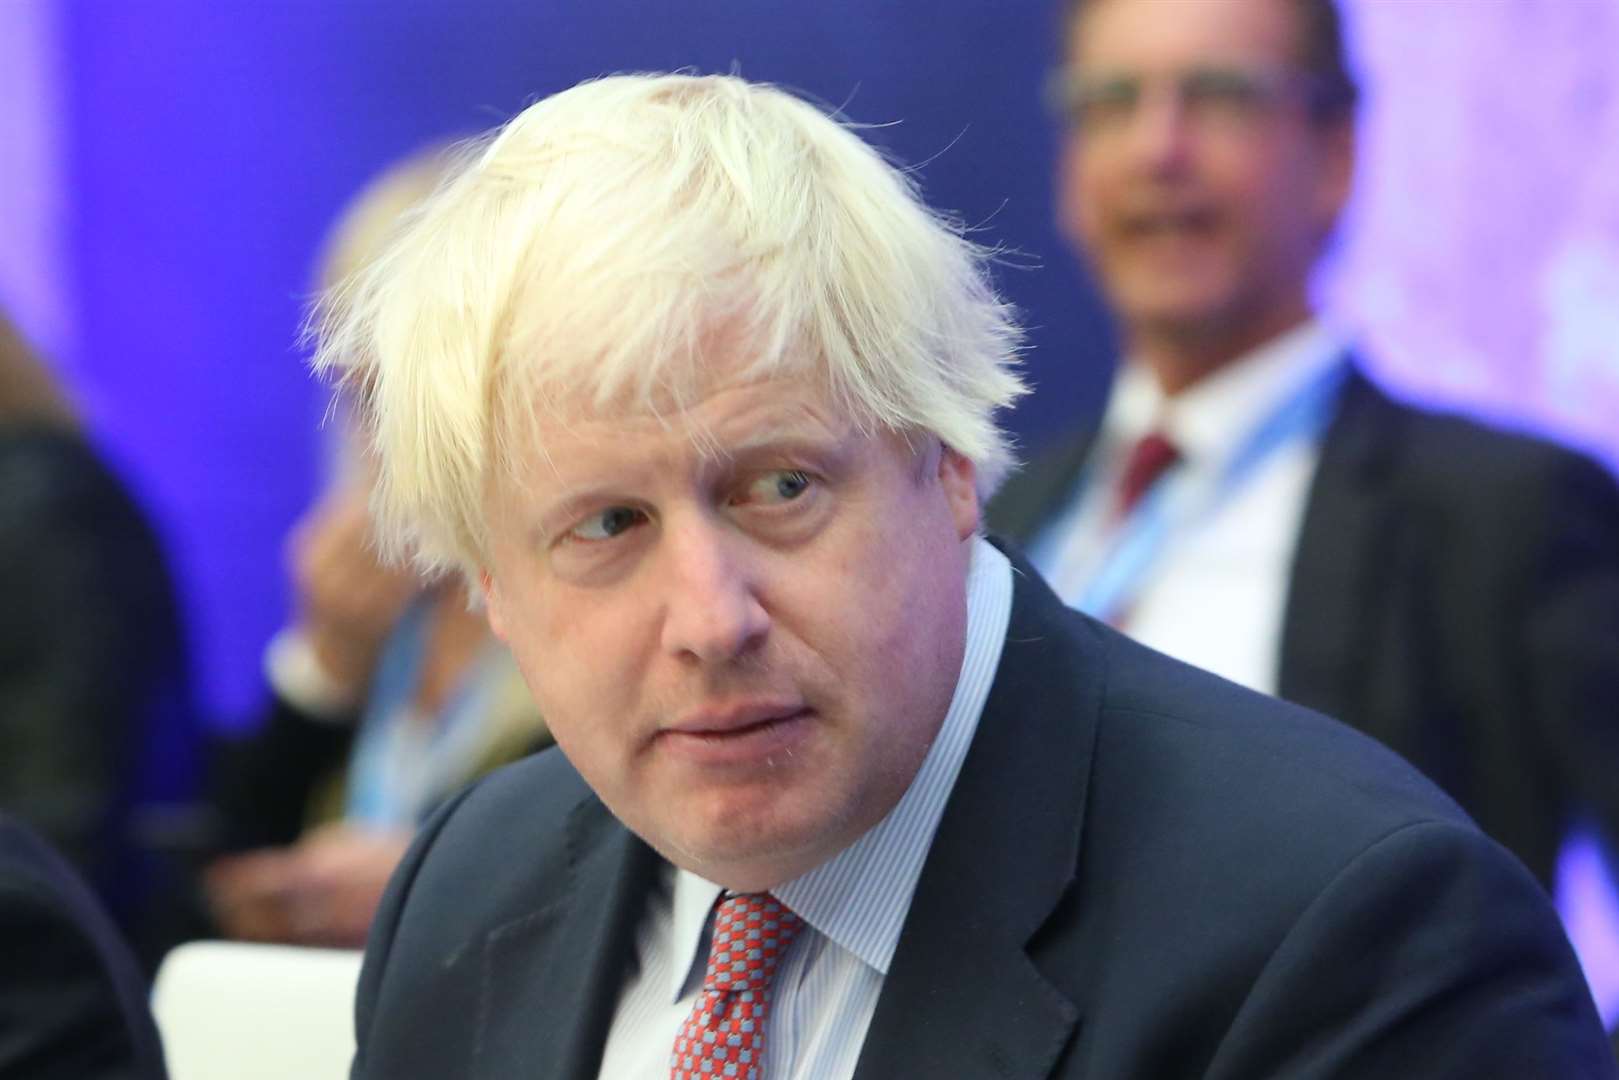 Boris Johnson pledged during the last General Election campaign to build the hospital